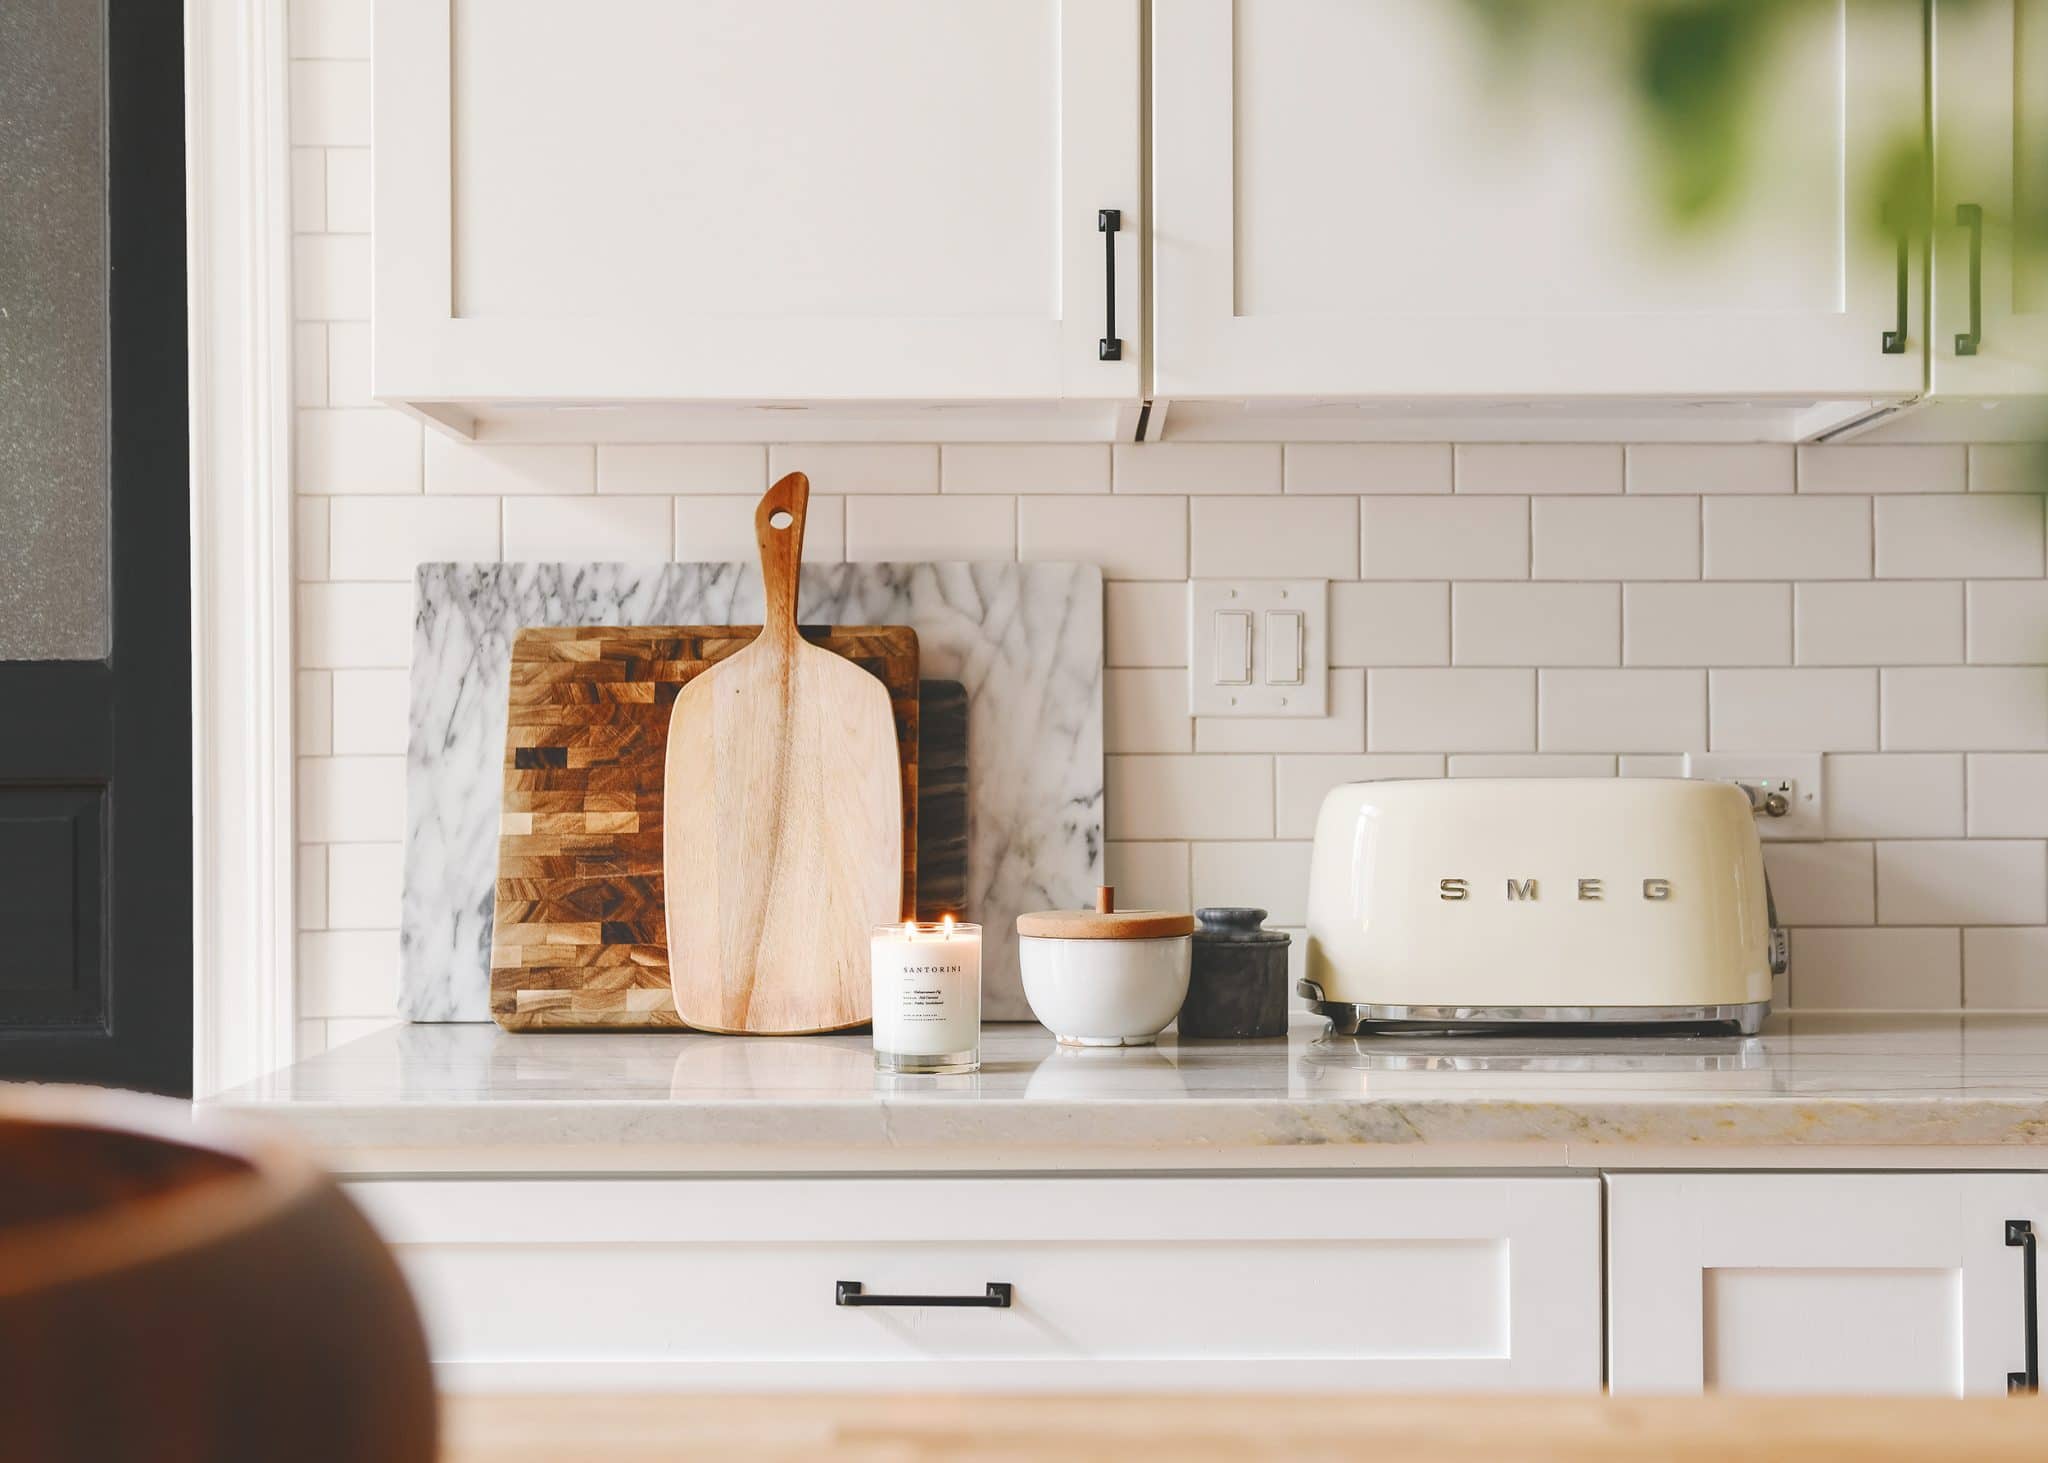 A kitchen countertop with a candle burning next to the toaster | the scents that fill our home, via Yellow Brick Home